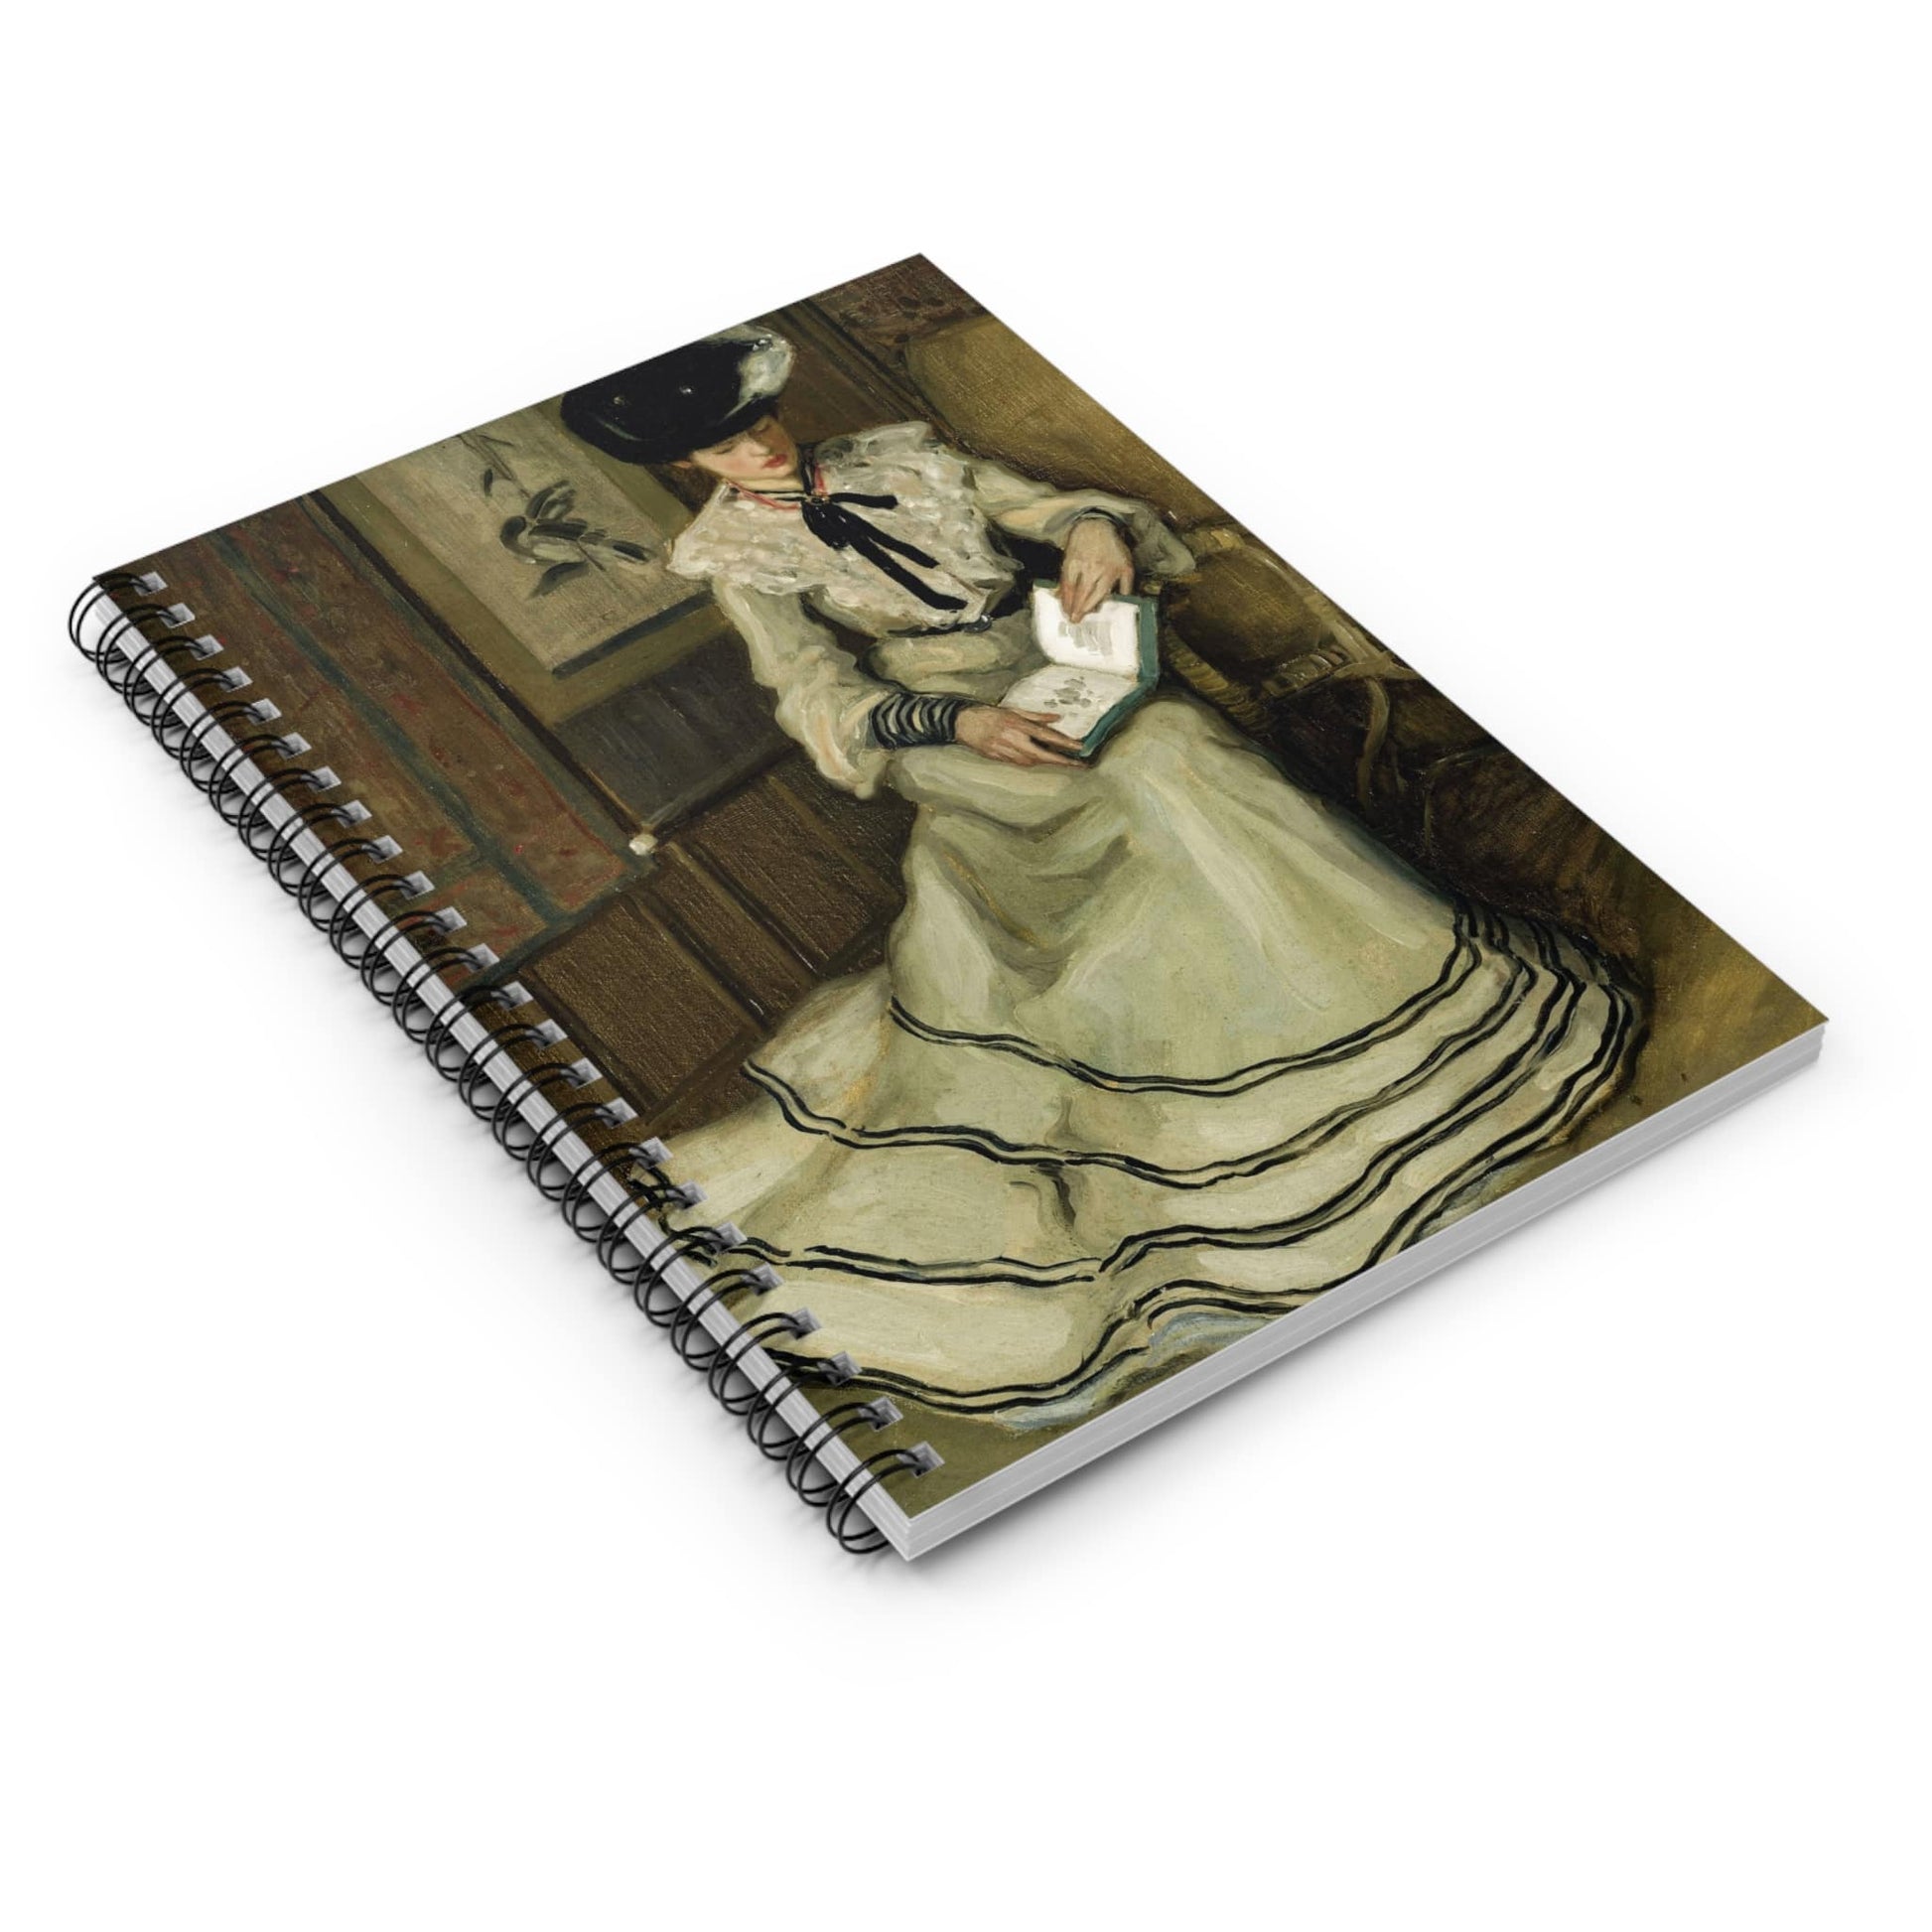 Reading Room Spiral Notebook Laying Flat on White Surface